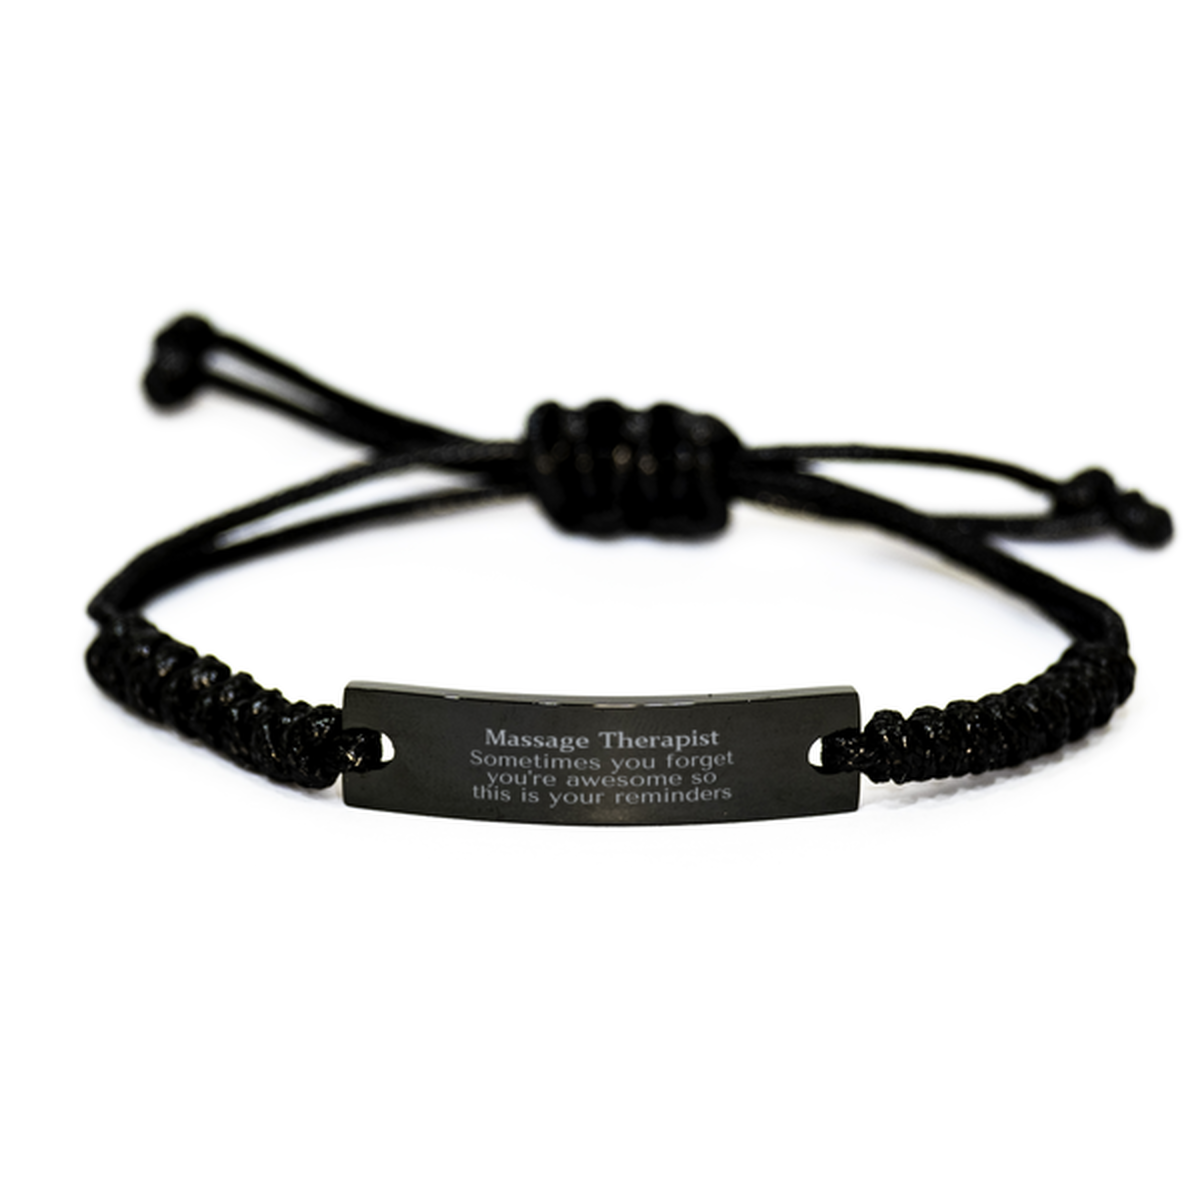 Sentimental Massage Therapist Black Rope Bracelet, Massage Therapist Sometimes you forget you're awesome so this is your reminders, Graduation Christmas Birthday Gifts for Massage Therapist, Men, Women, Coworkers